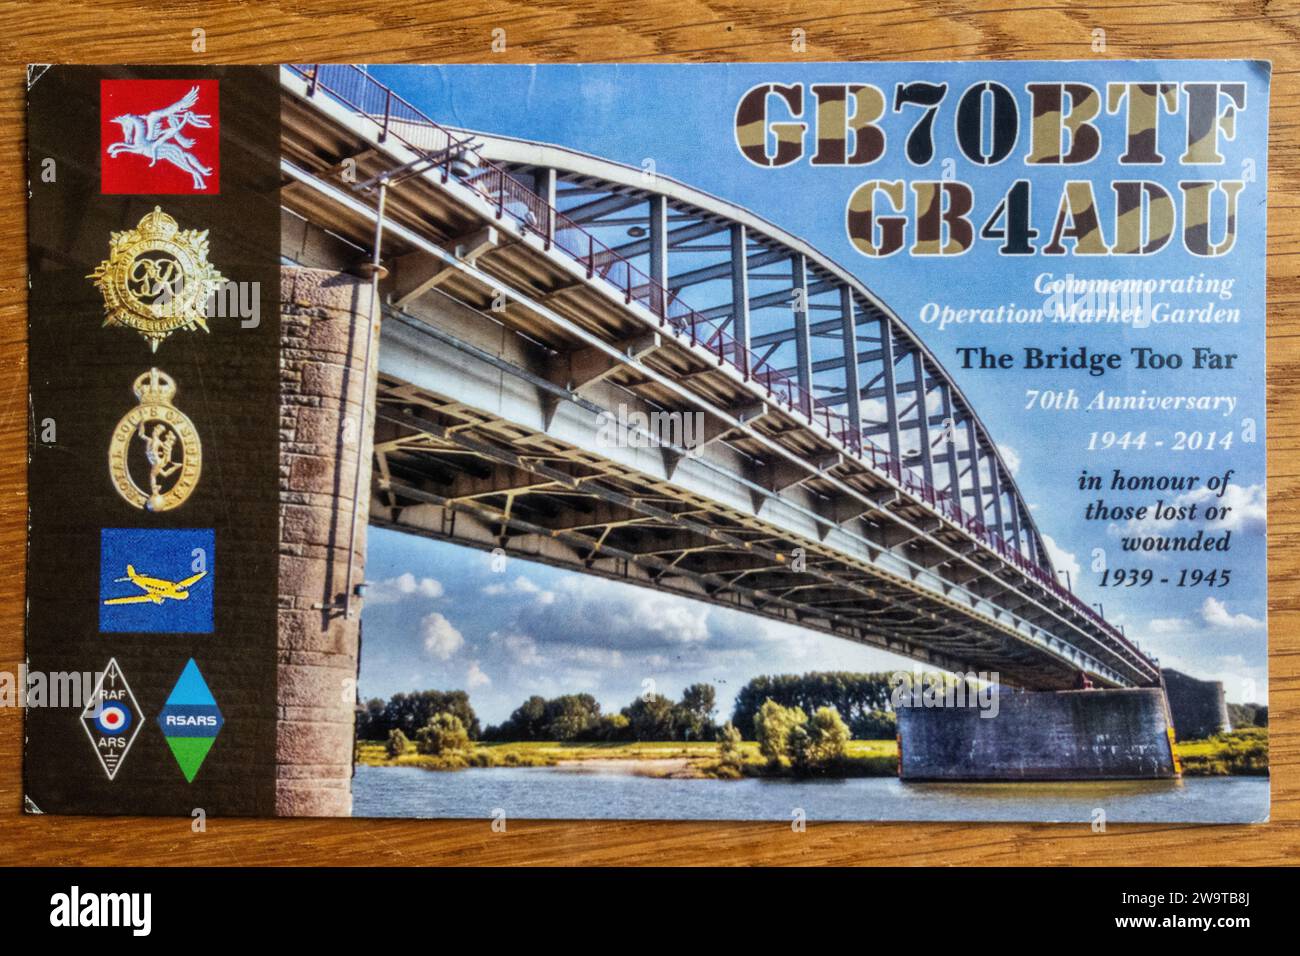 Amateur radio or ham radio QSL postcard with call sign, from special event to celebrate the 70th Anniversary of Operation Market Garden, 2014, UK Stock Photo